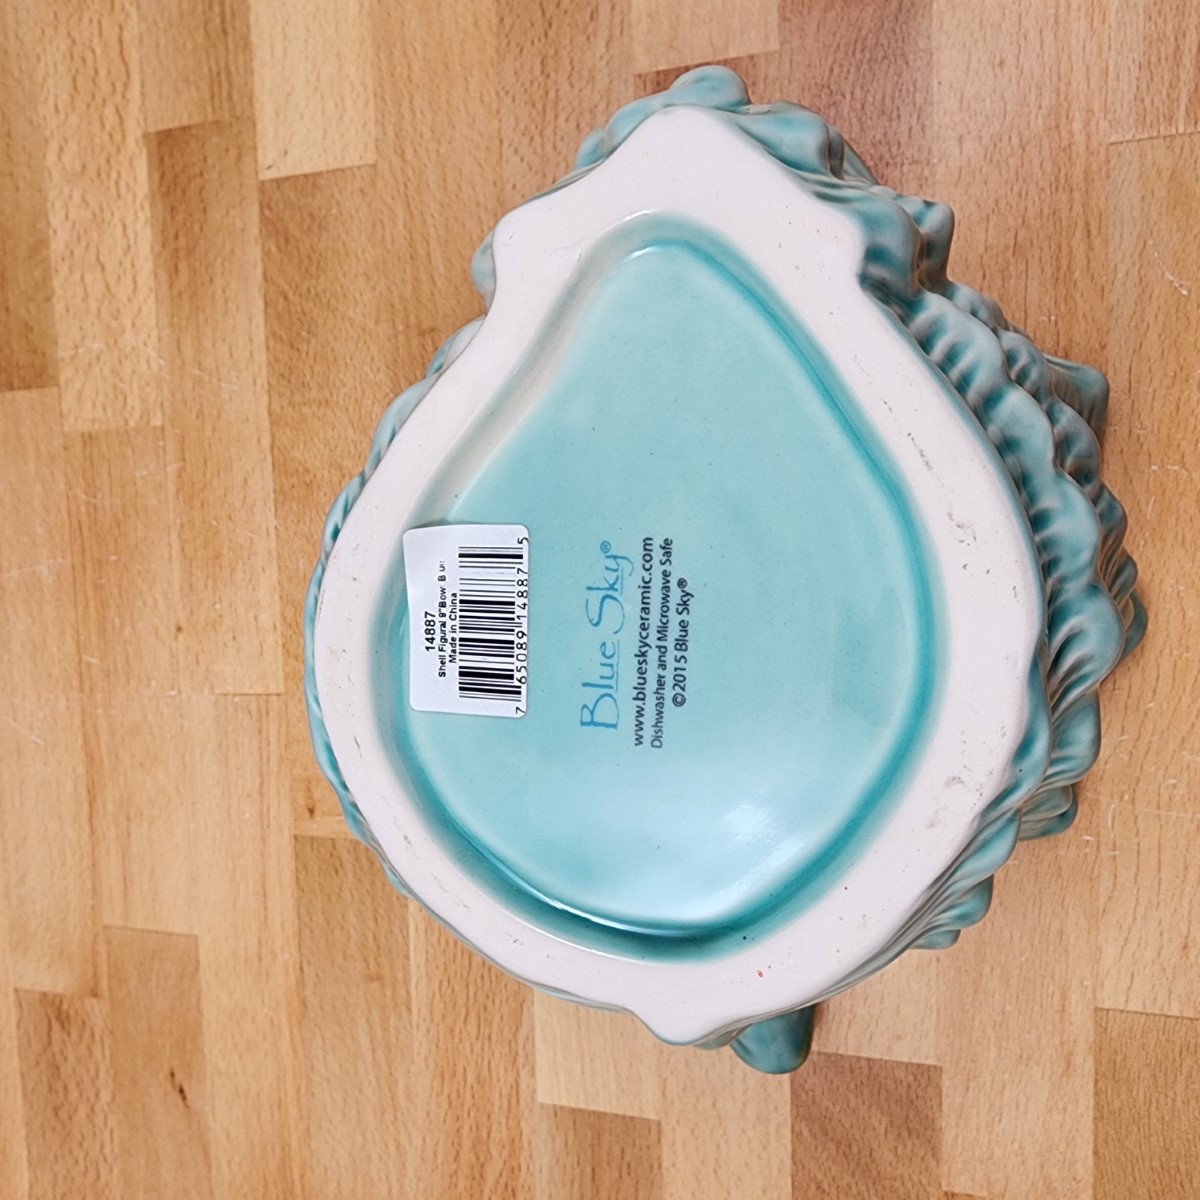 This Large Conch Shell Sea Life Bowl Candy Treat Jar by Blue Sky Clayworks Ceramic is made with love by Premier Homegoods! Shop more unique gift ideas today with Spots Initiatives, the best way to support creators.